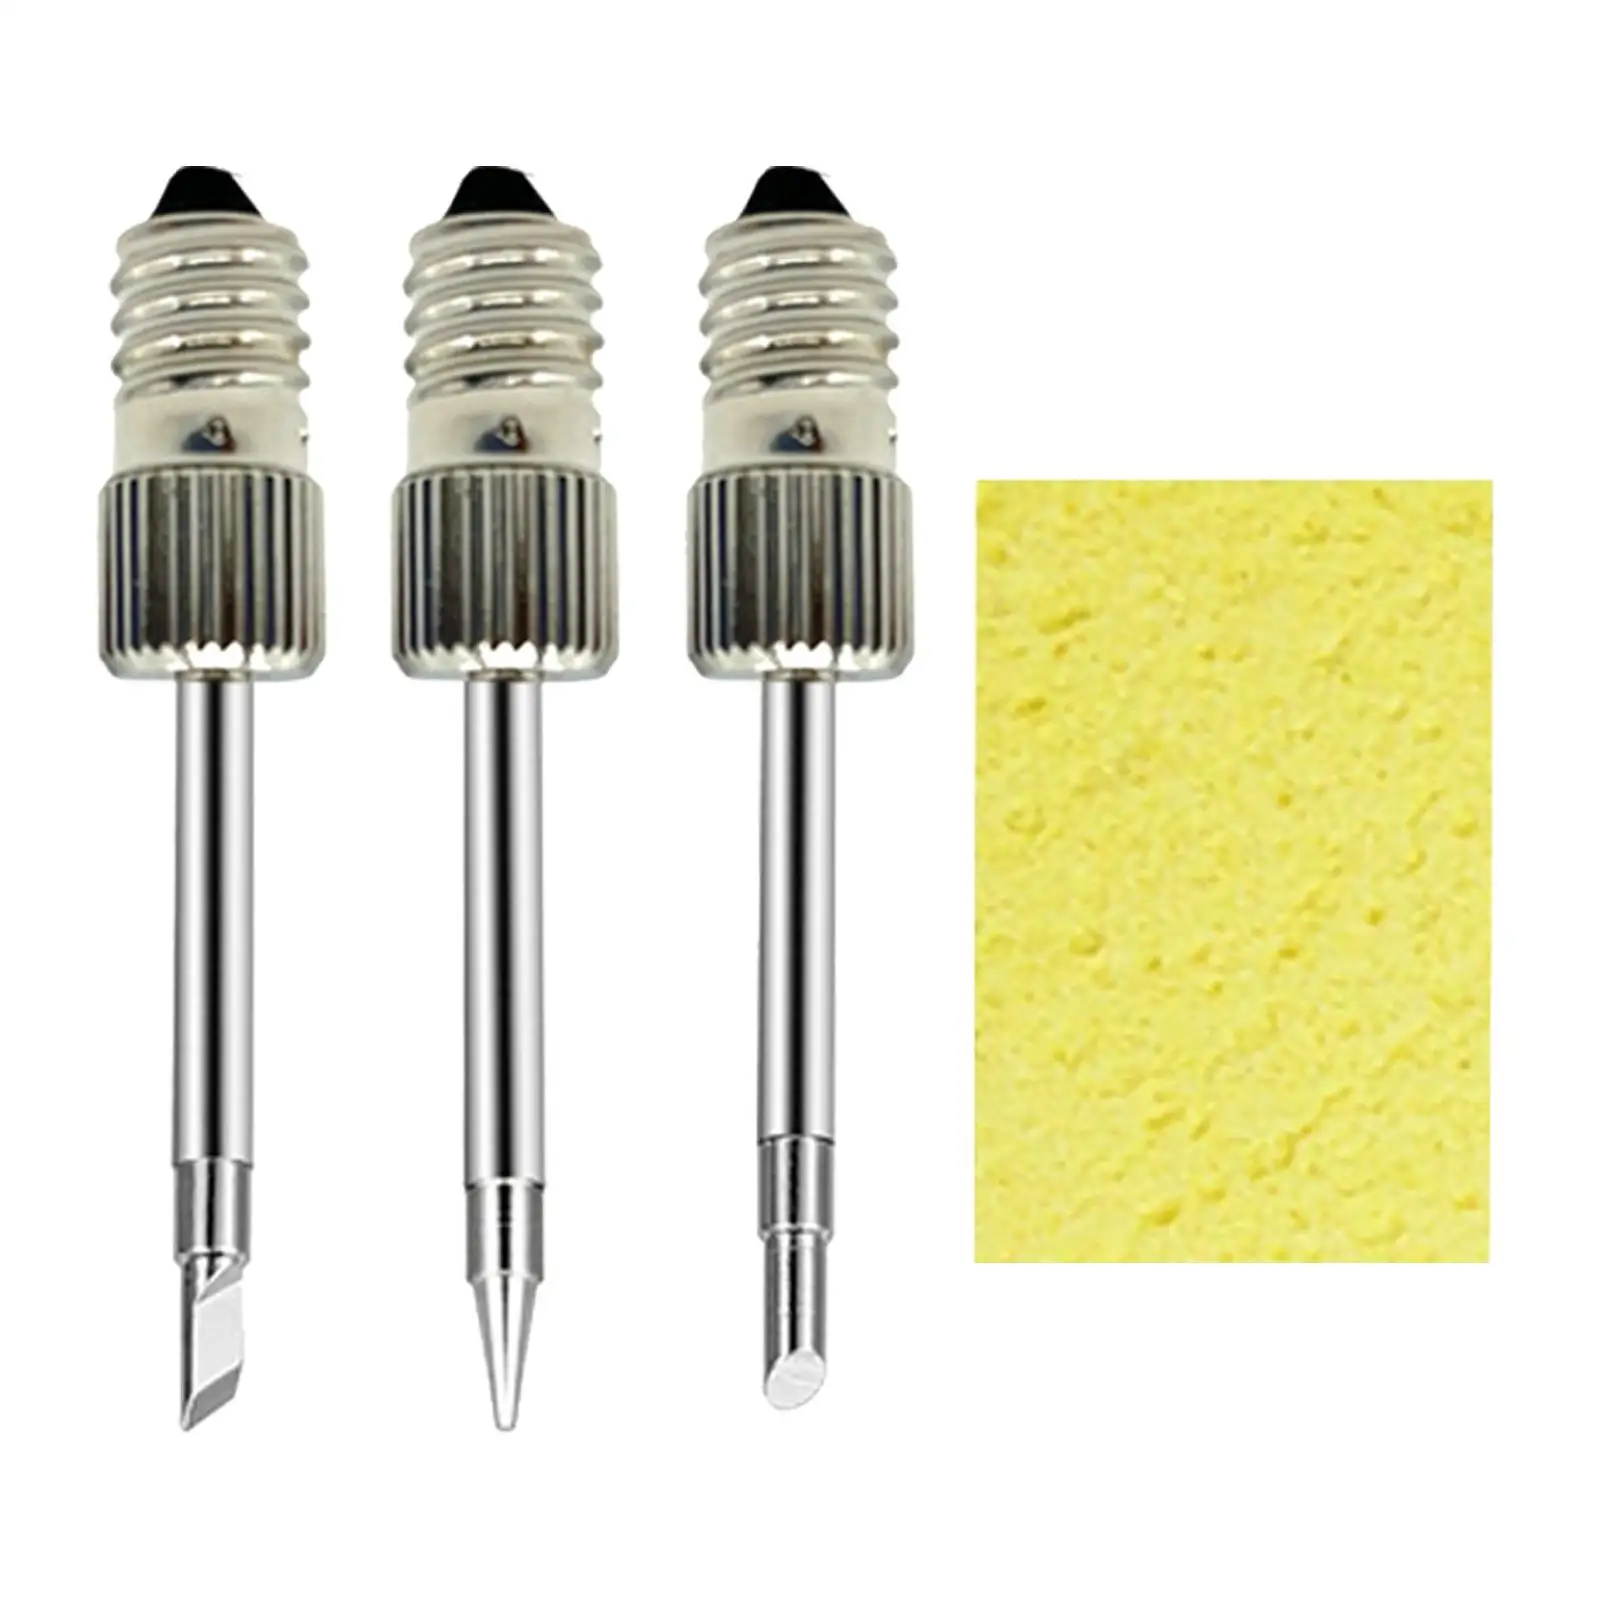 3x Soldering Tips Replacement USB Soldering for E10 Interface